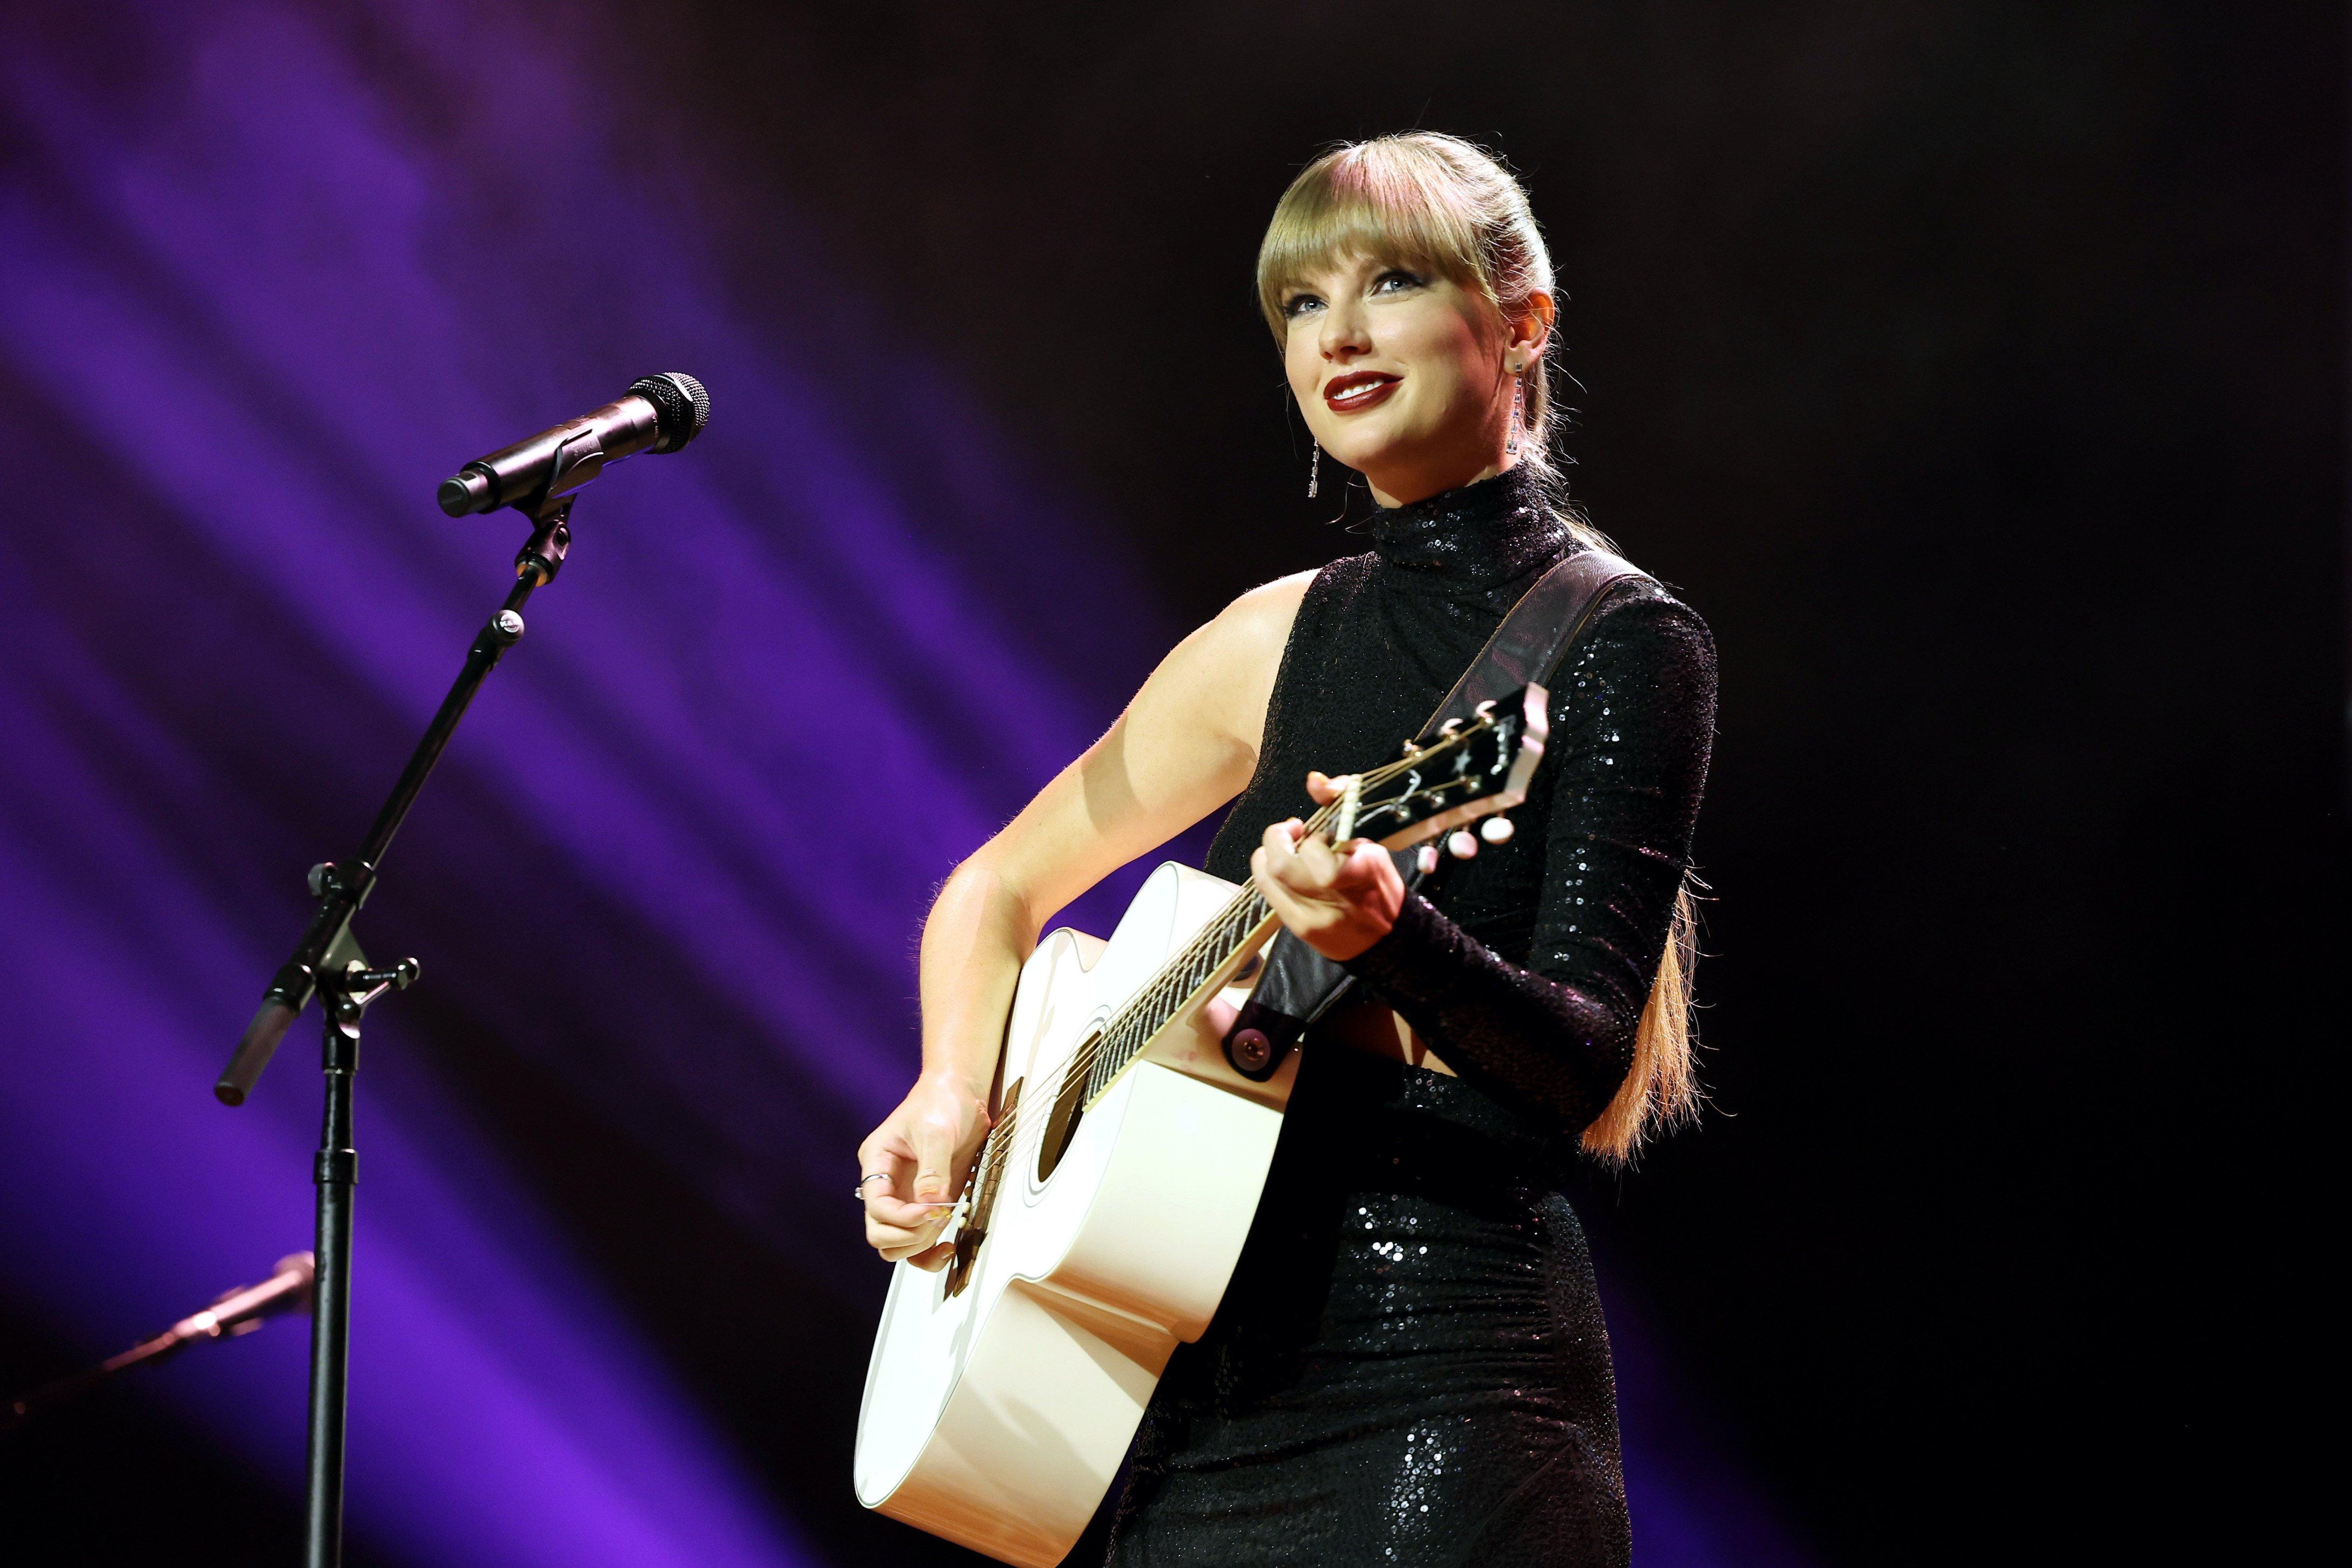 Taylor Swift Re-Recorded Albums Pushes Music Industry to Change